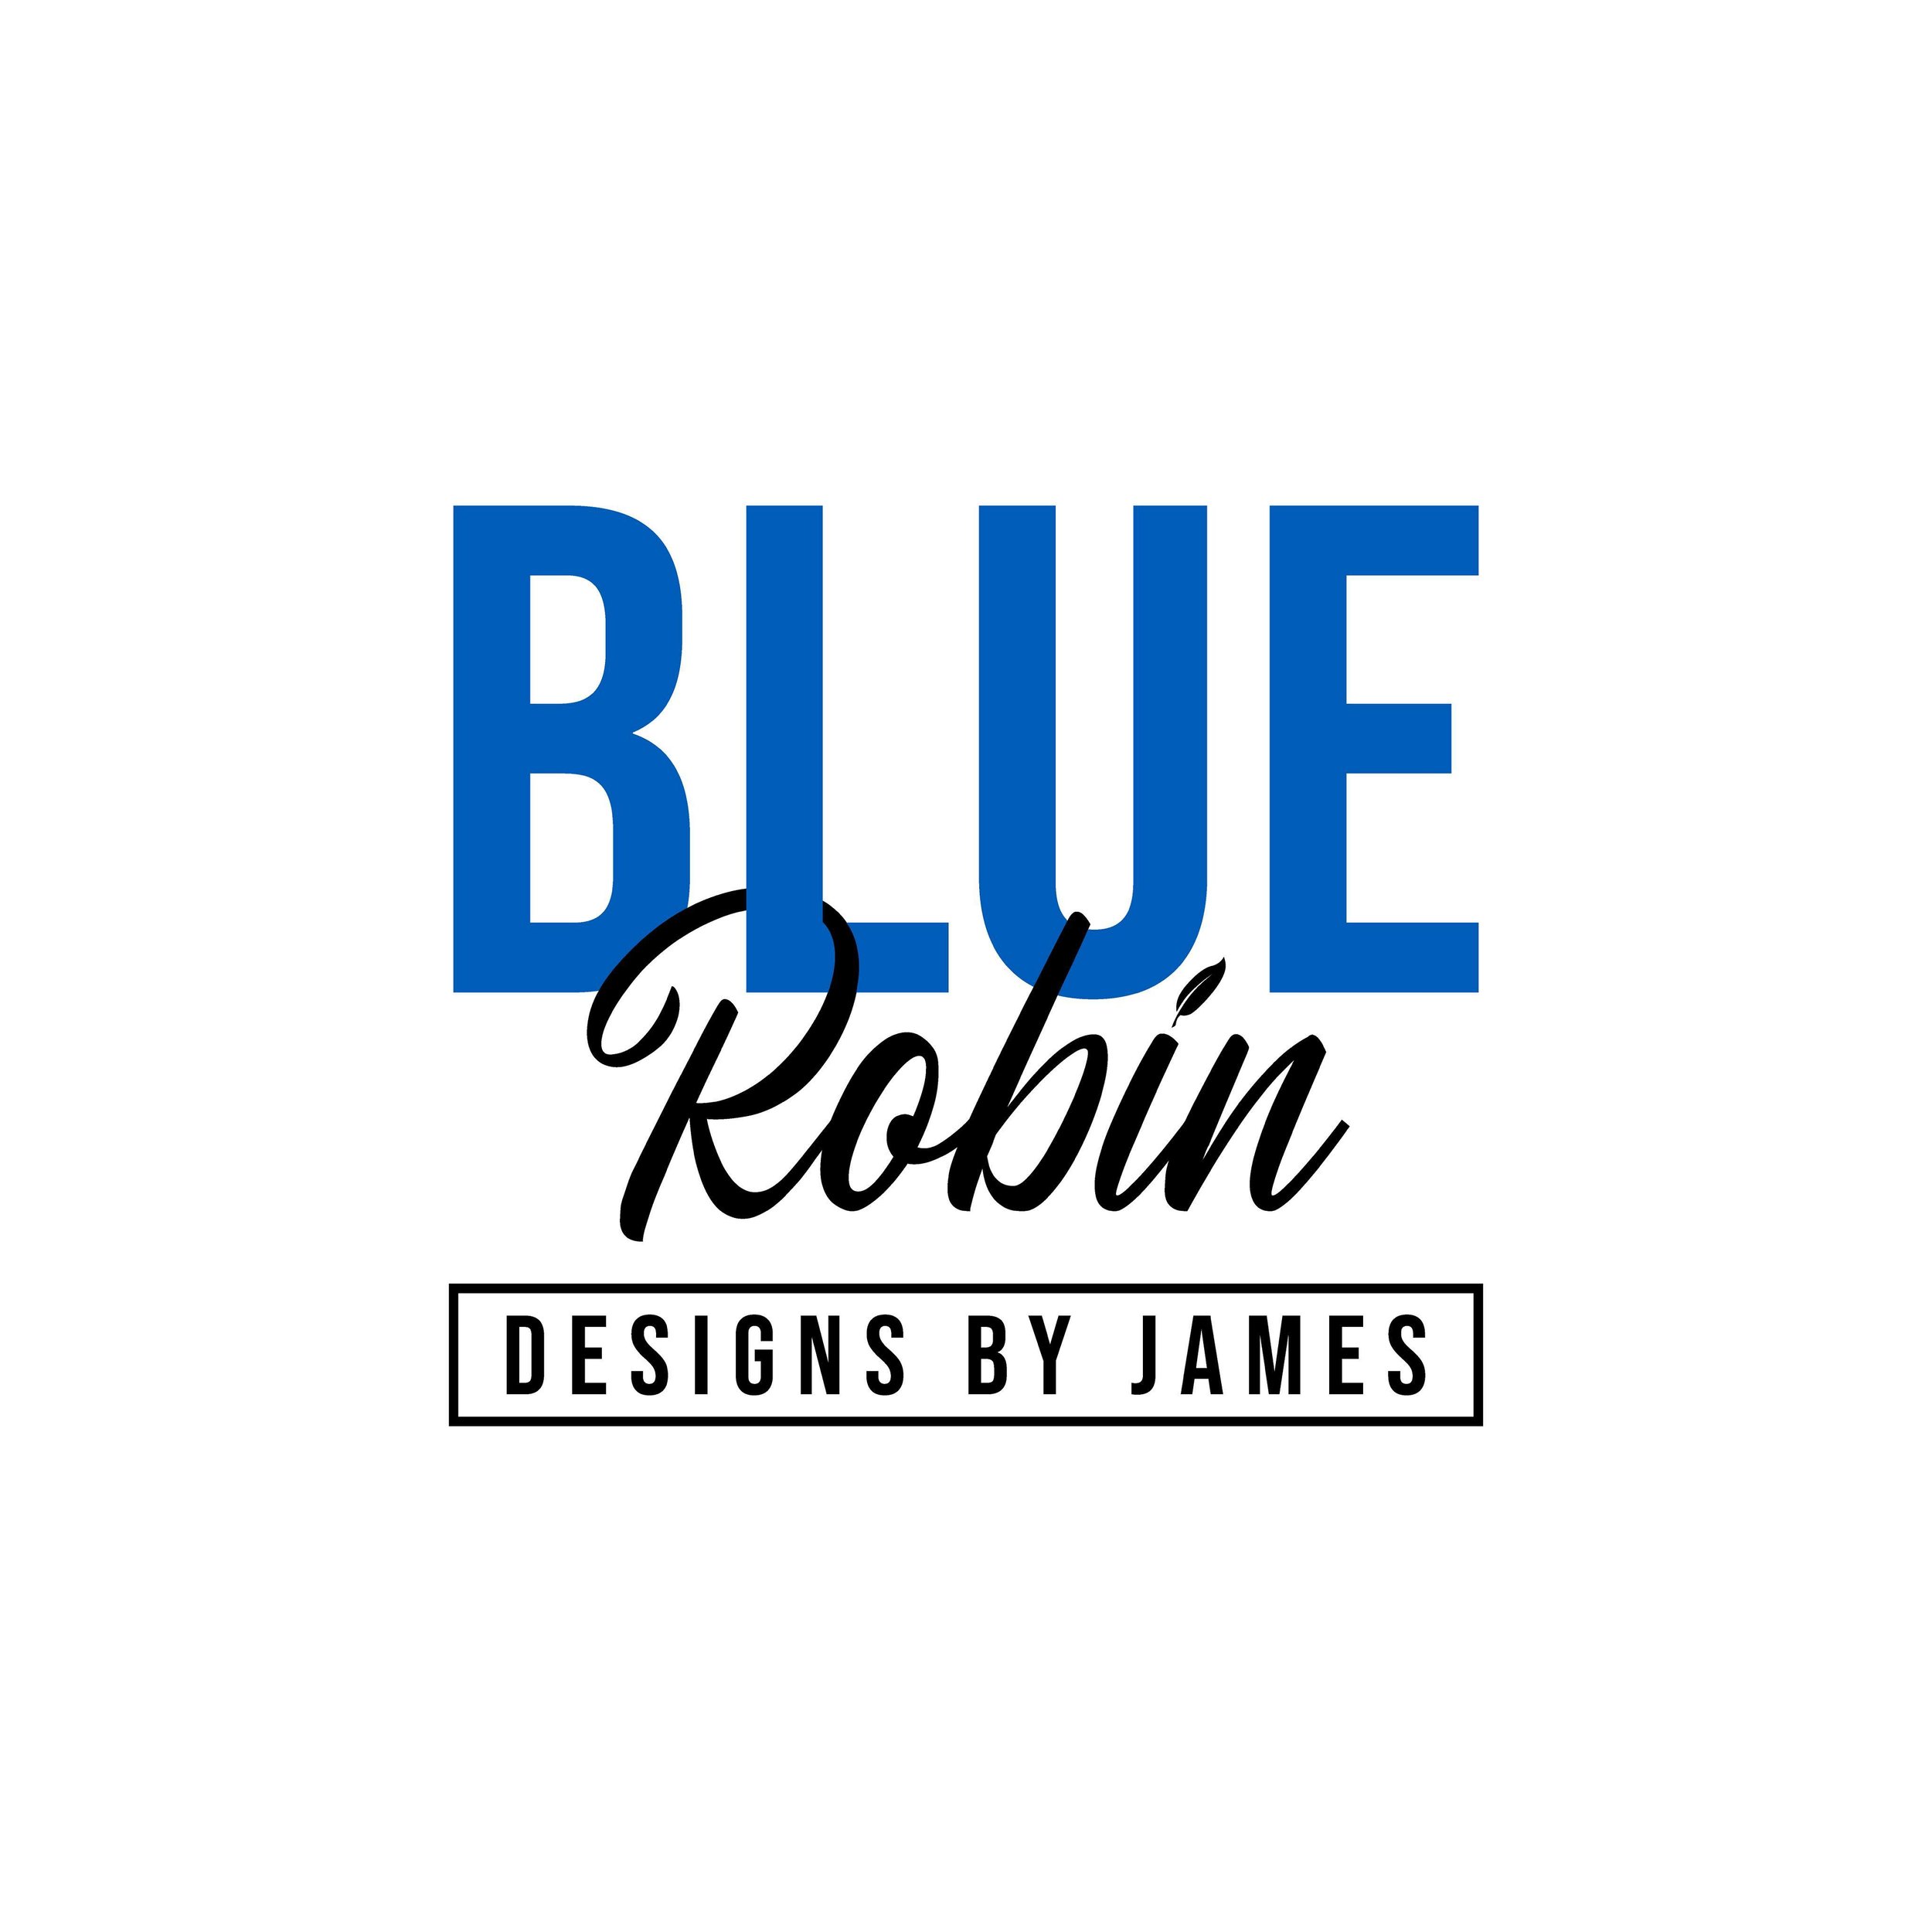 Very excited to share and announce that my brand new website look and slightly updated logo for 2024 is now live and running, go check it out (link also on profile)

👉🏼👉🏼 www.bluerobin.uk 👈🏼👈🏼

Also to announce I will be starting to post more